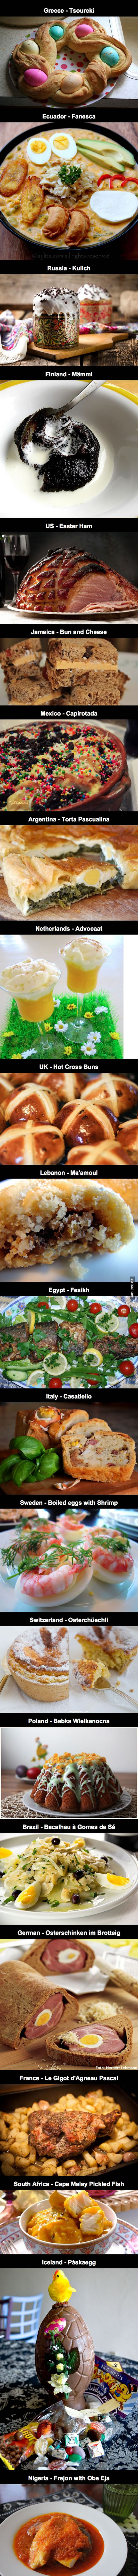 Easter-Food-around-the-World---What-did-I-miss.jpg